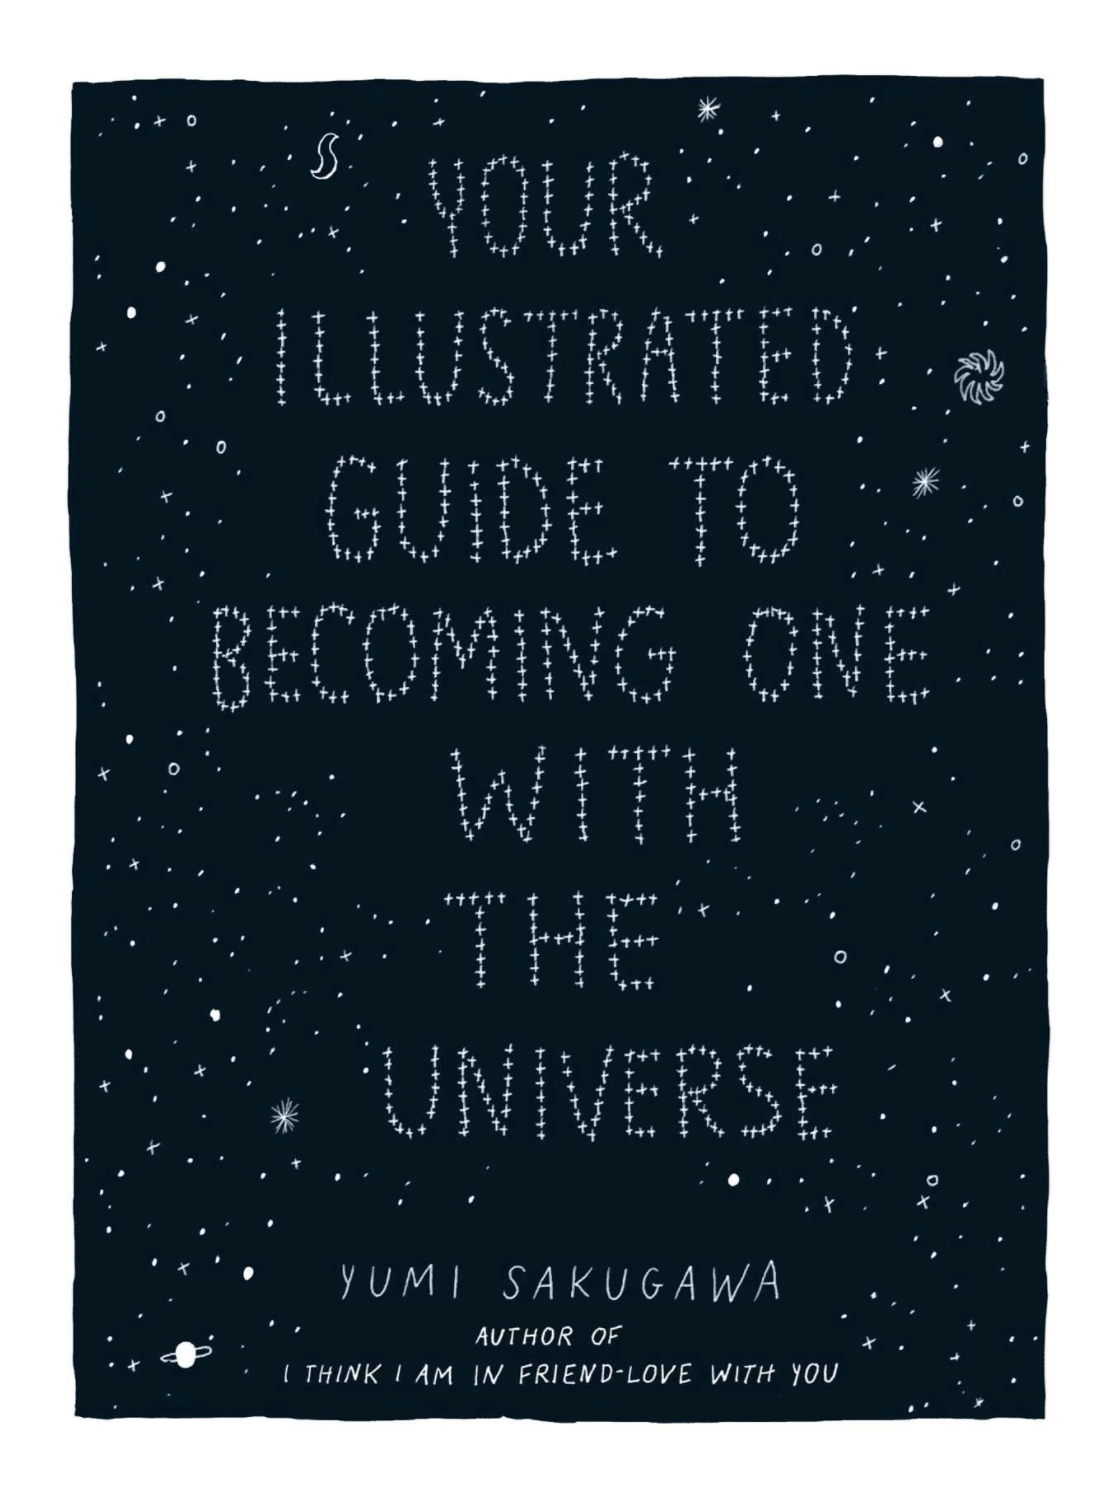 YOUR ILLUSTRATED GUIDE TO BECOMING ONE WITH THE UNIVERSE BY YUMI SAKUGAWA